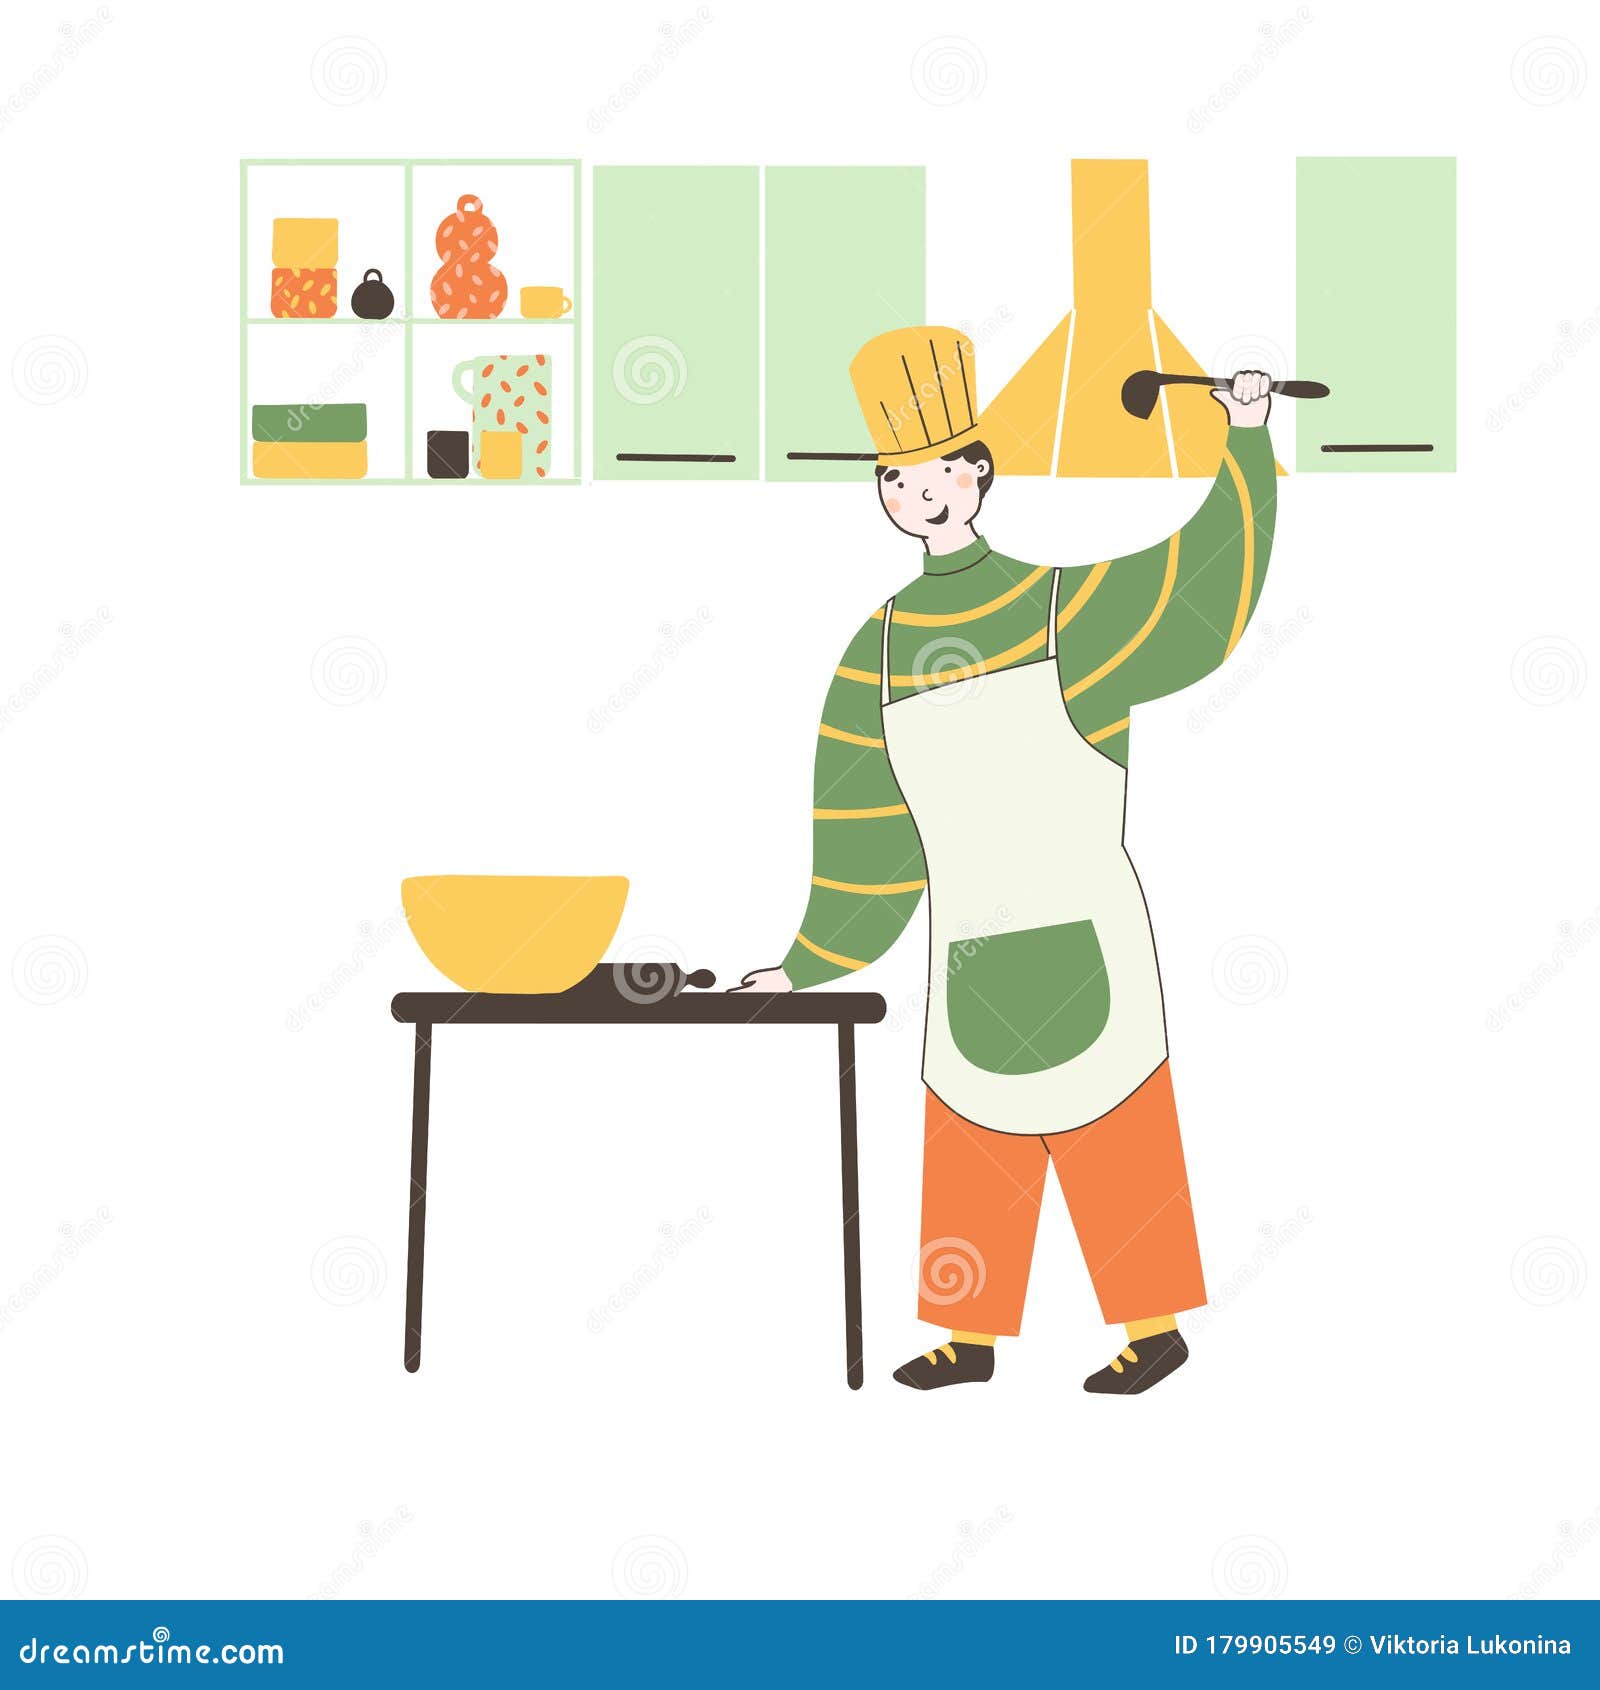 Flat Cook Character Kitchen in Cartoon Style. Happy Family Characters  Routine Stock Vector - Illustration of kitchen, dish: 179905549